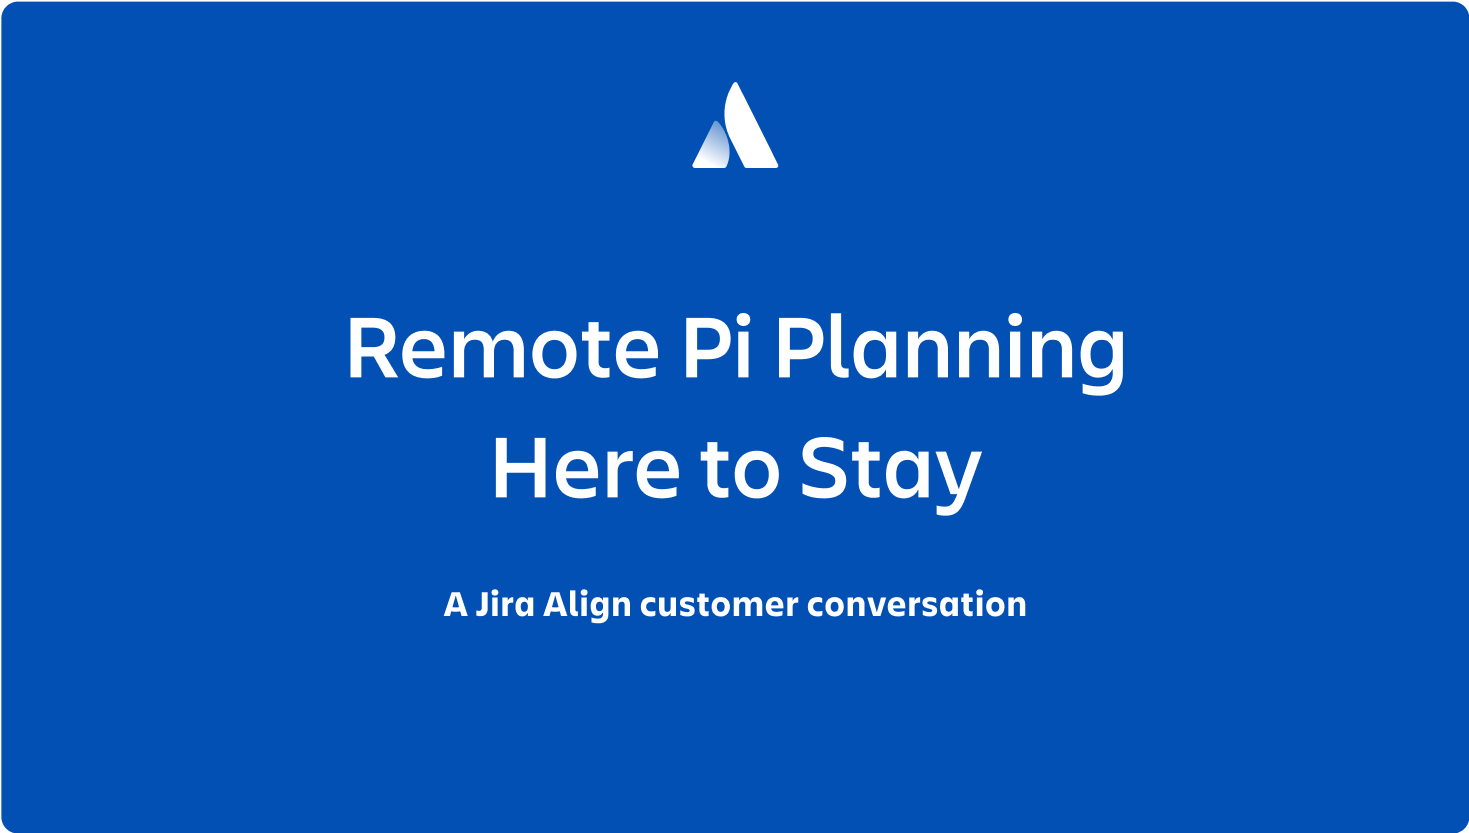 Remote Pi planning: Here to stay webinar thumbnail